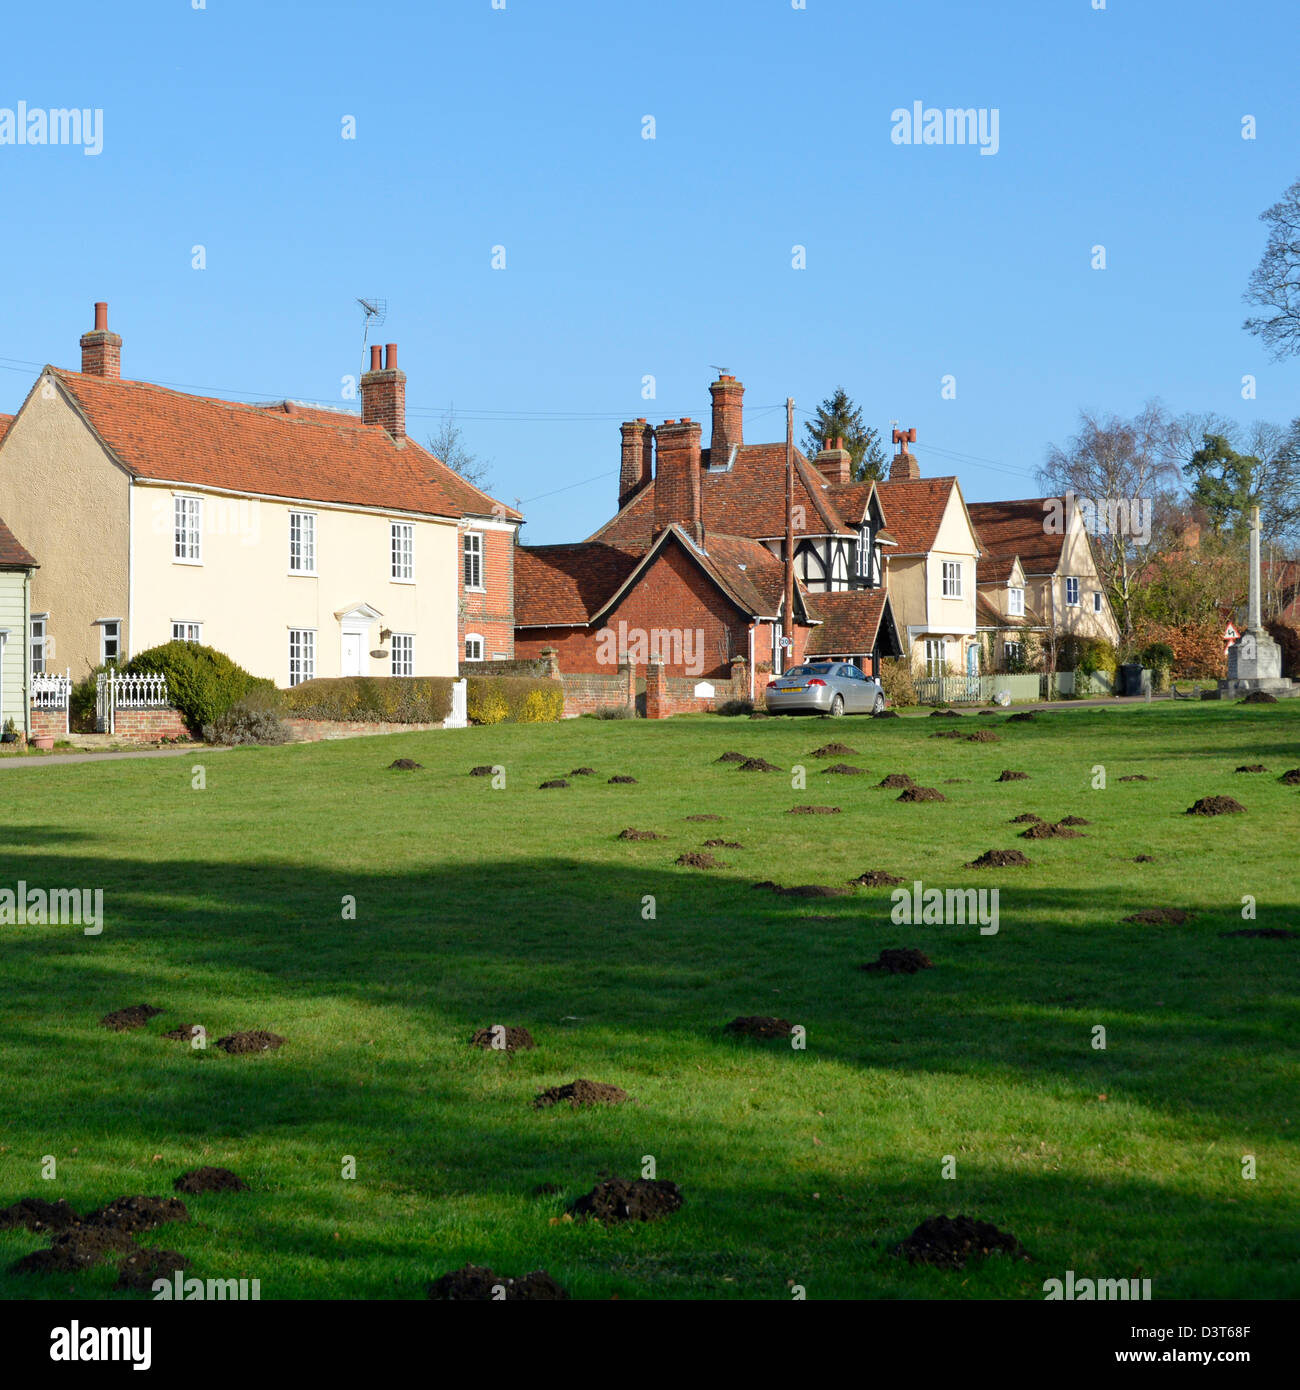 Village green with mole hills and country homes Stock Photo